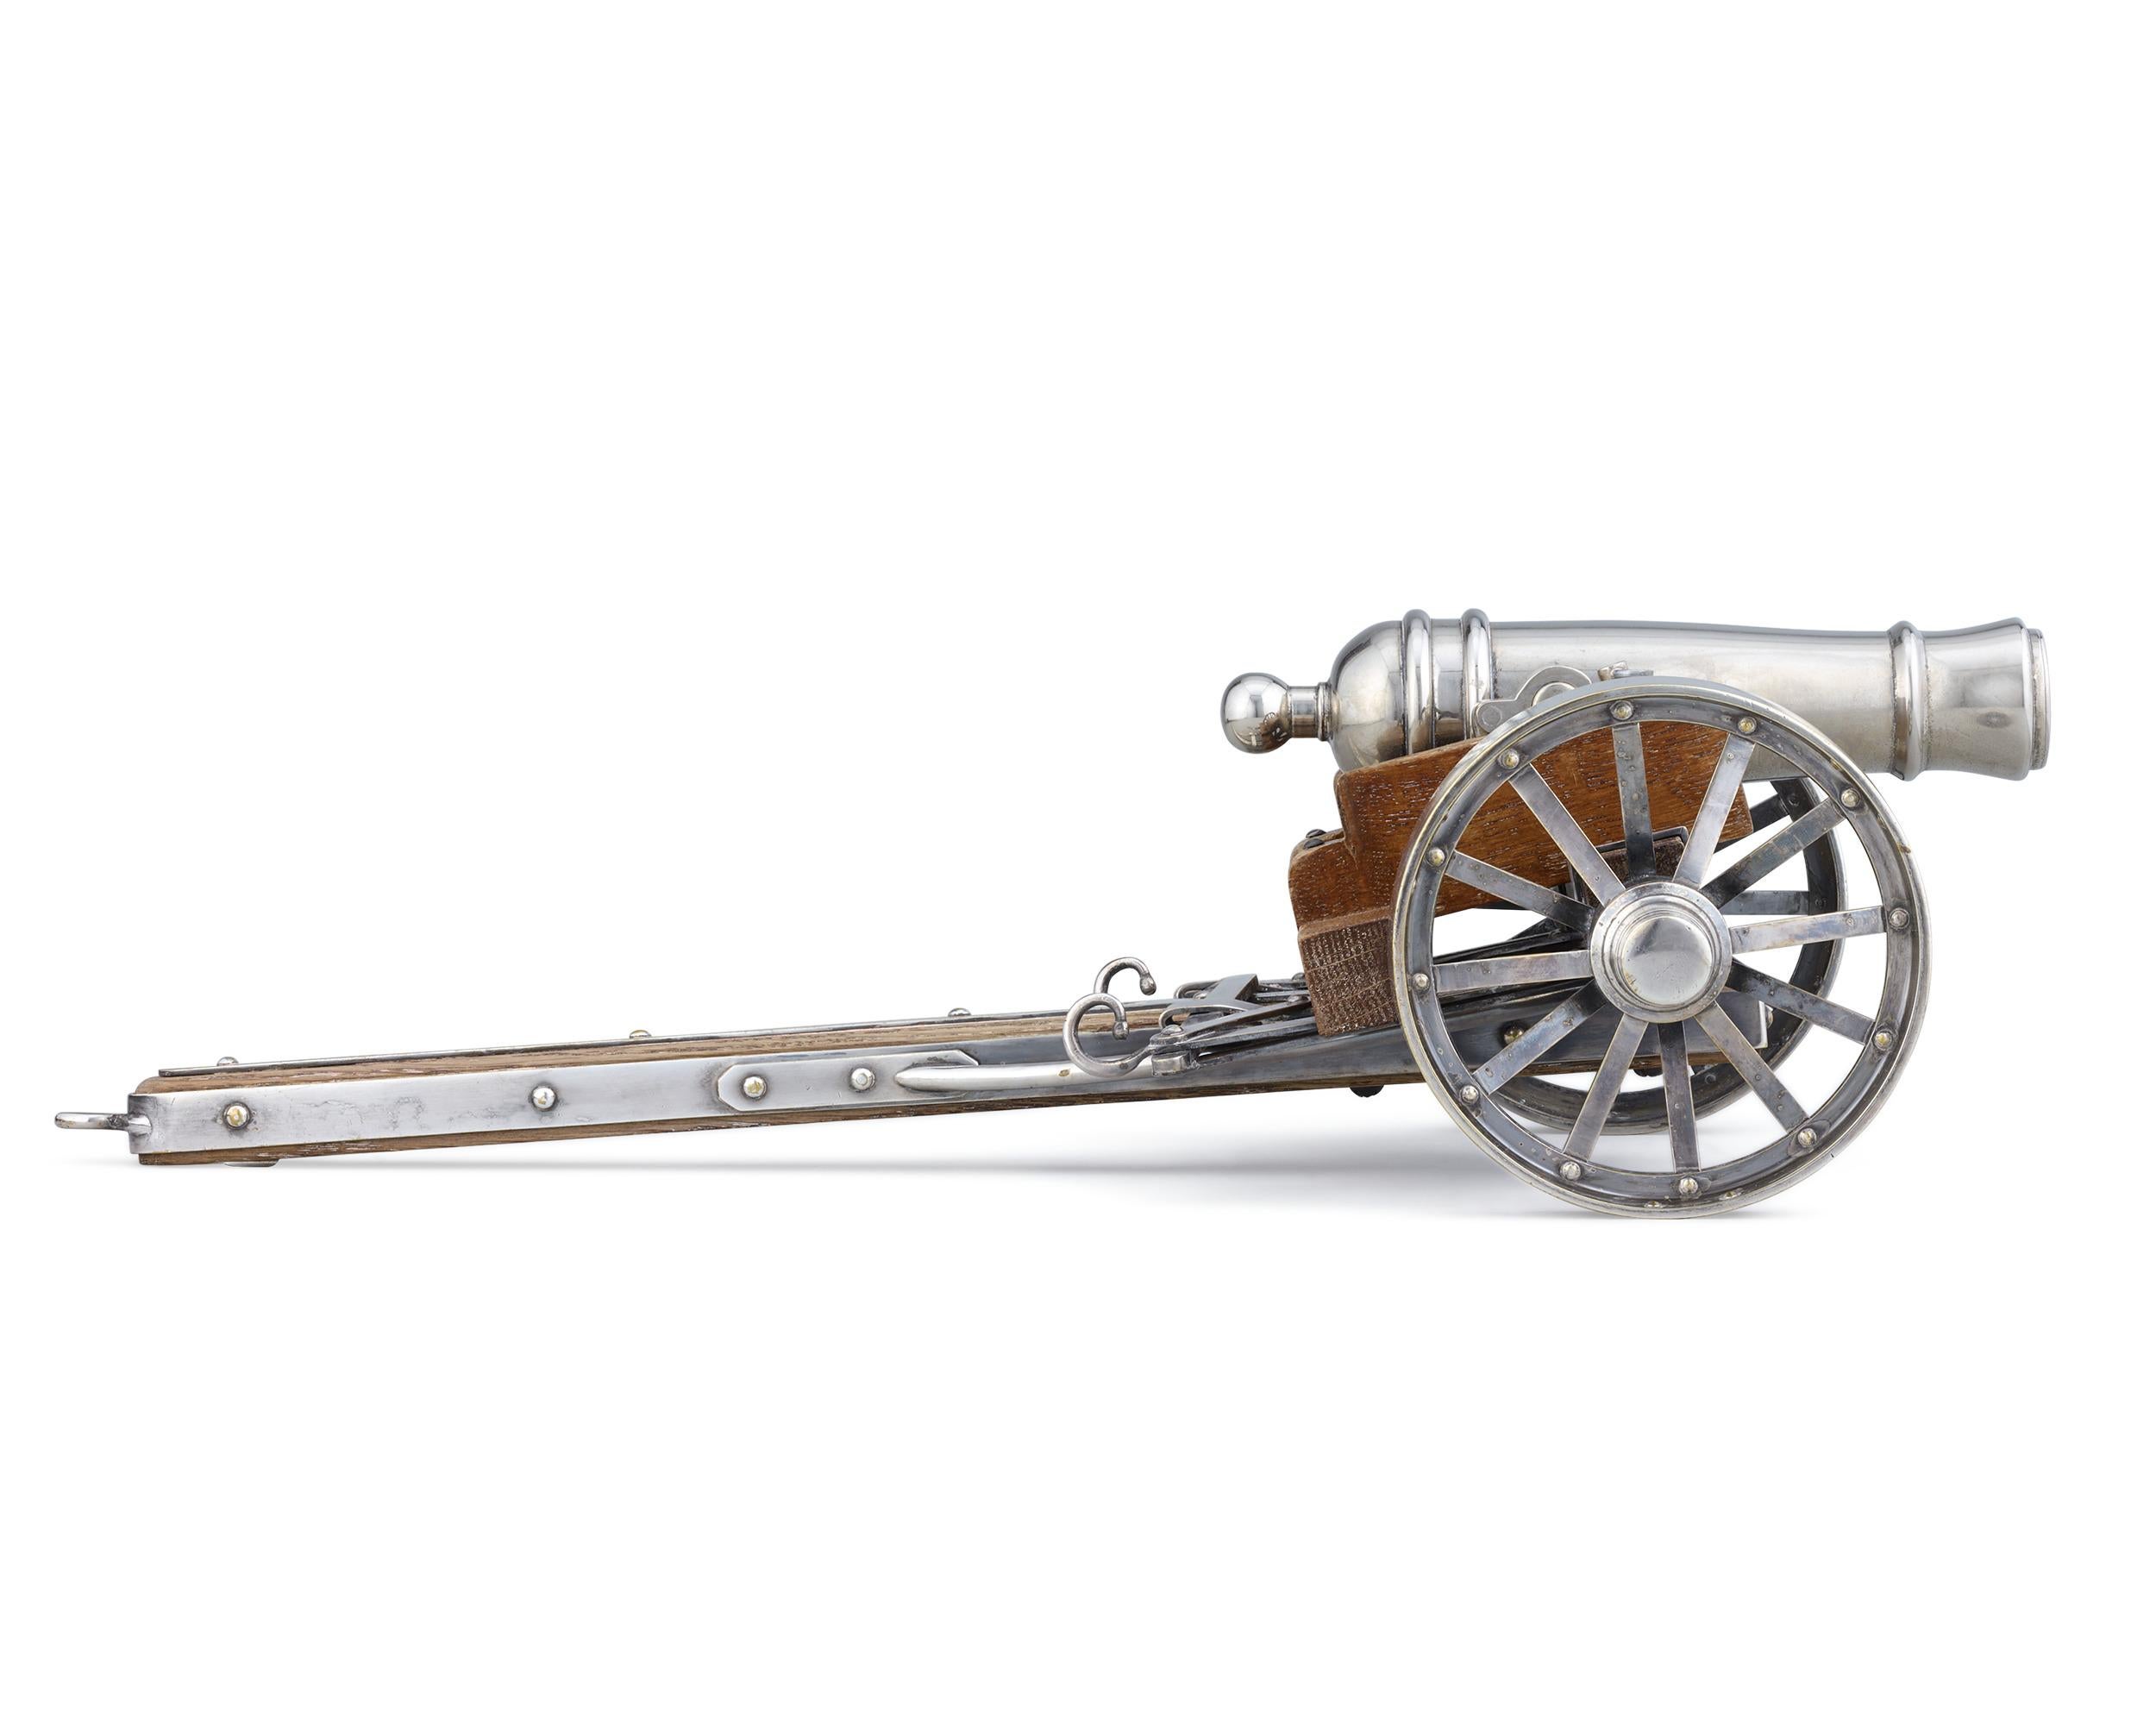 This exceptional objet d'art is modeled after a cannon from the siege of Mafeking, a 217-day conflict in South Africa during the Second Boer War. It is composed of silverplate over copper and showcases two wheels. Models such as these were highly